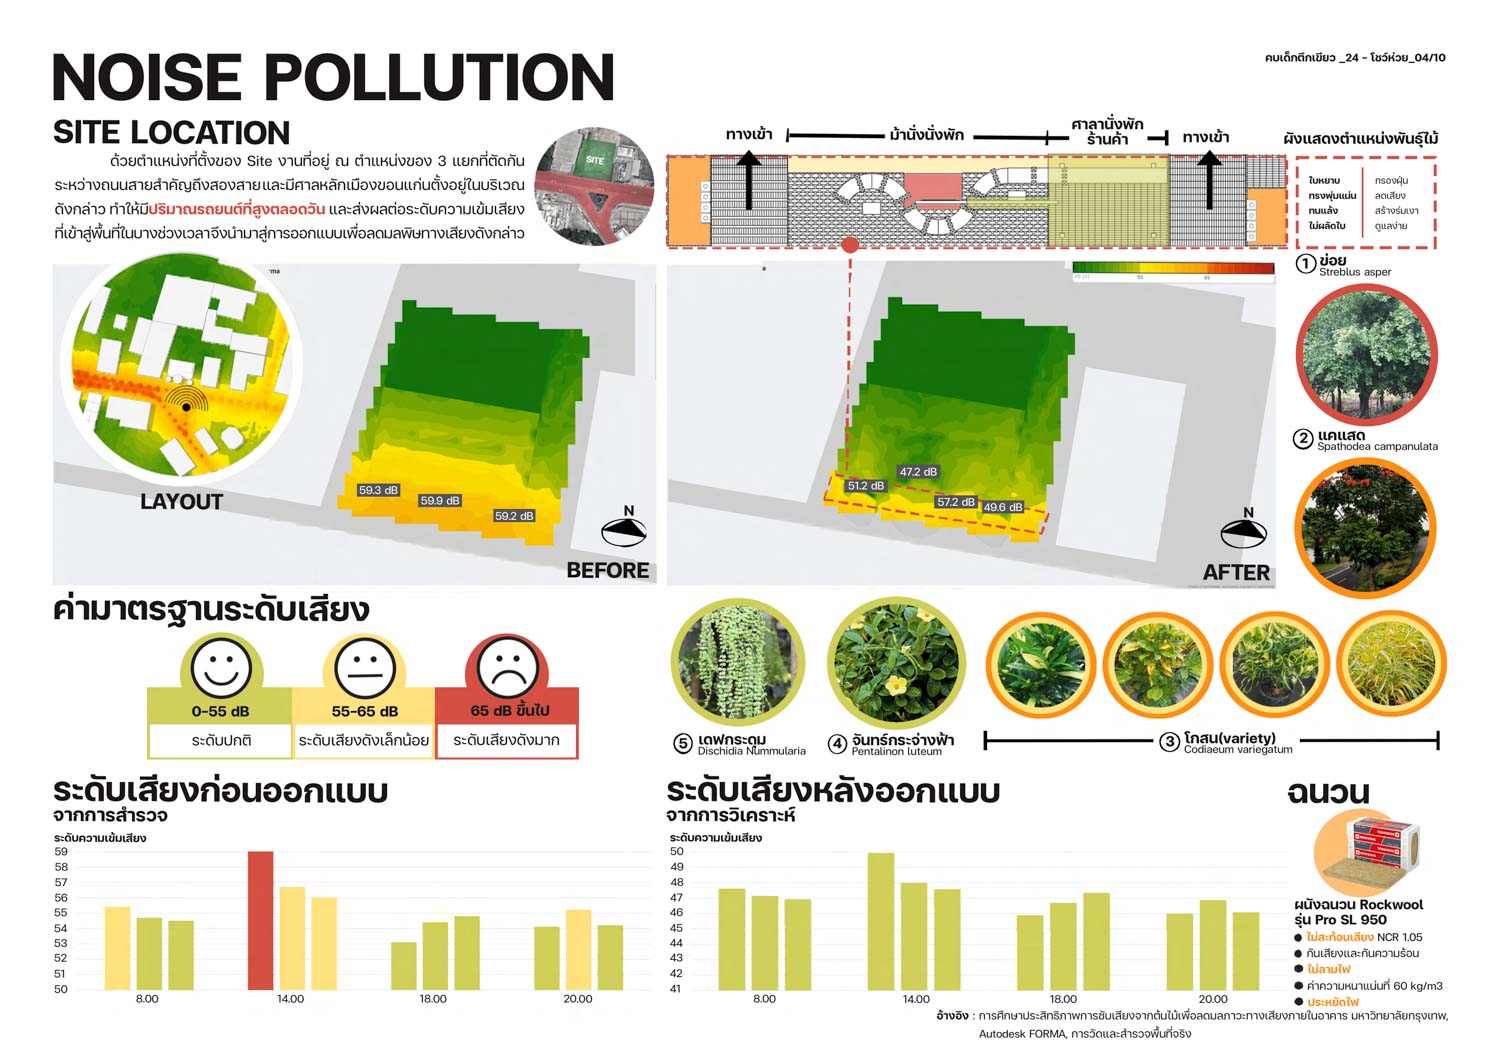 BIMobject Green Design Competition 2023